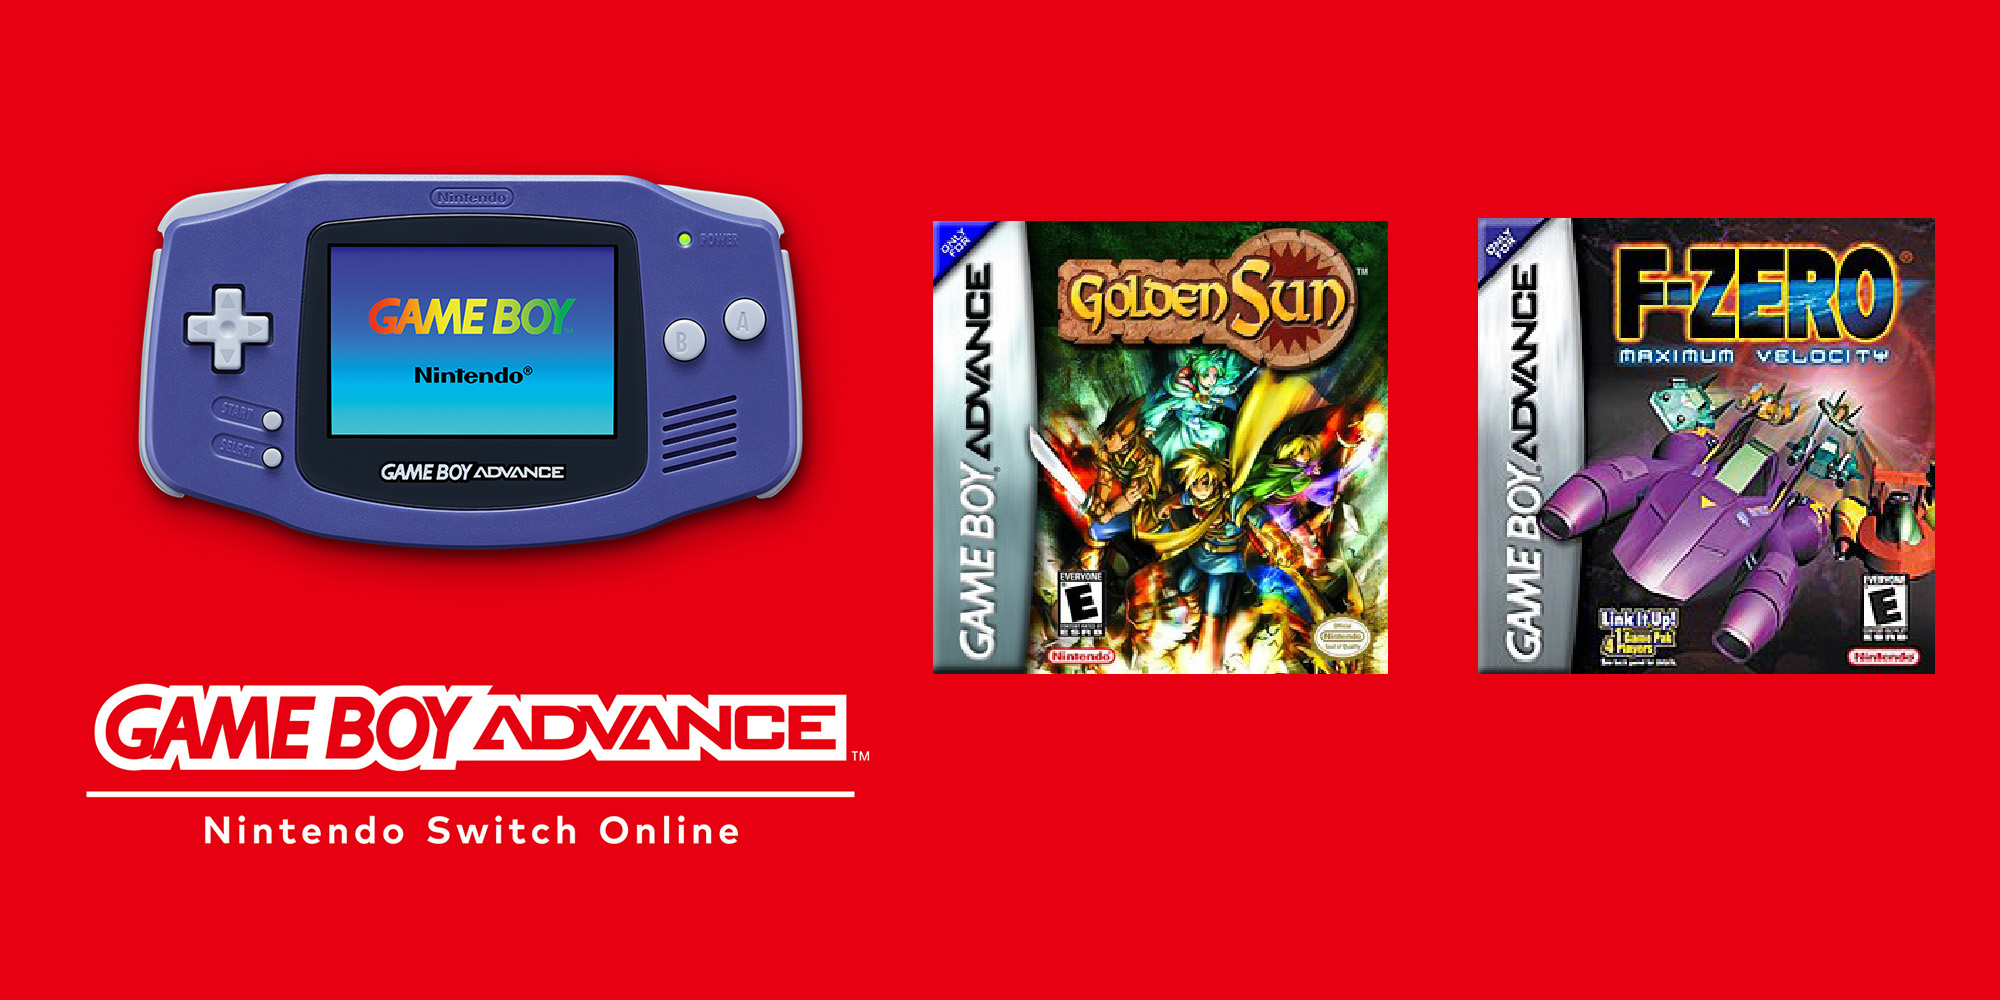 Rumor: A Game Boy Advance update for Nintendo Switch Online 